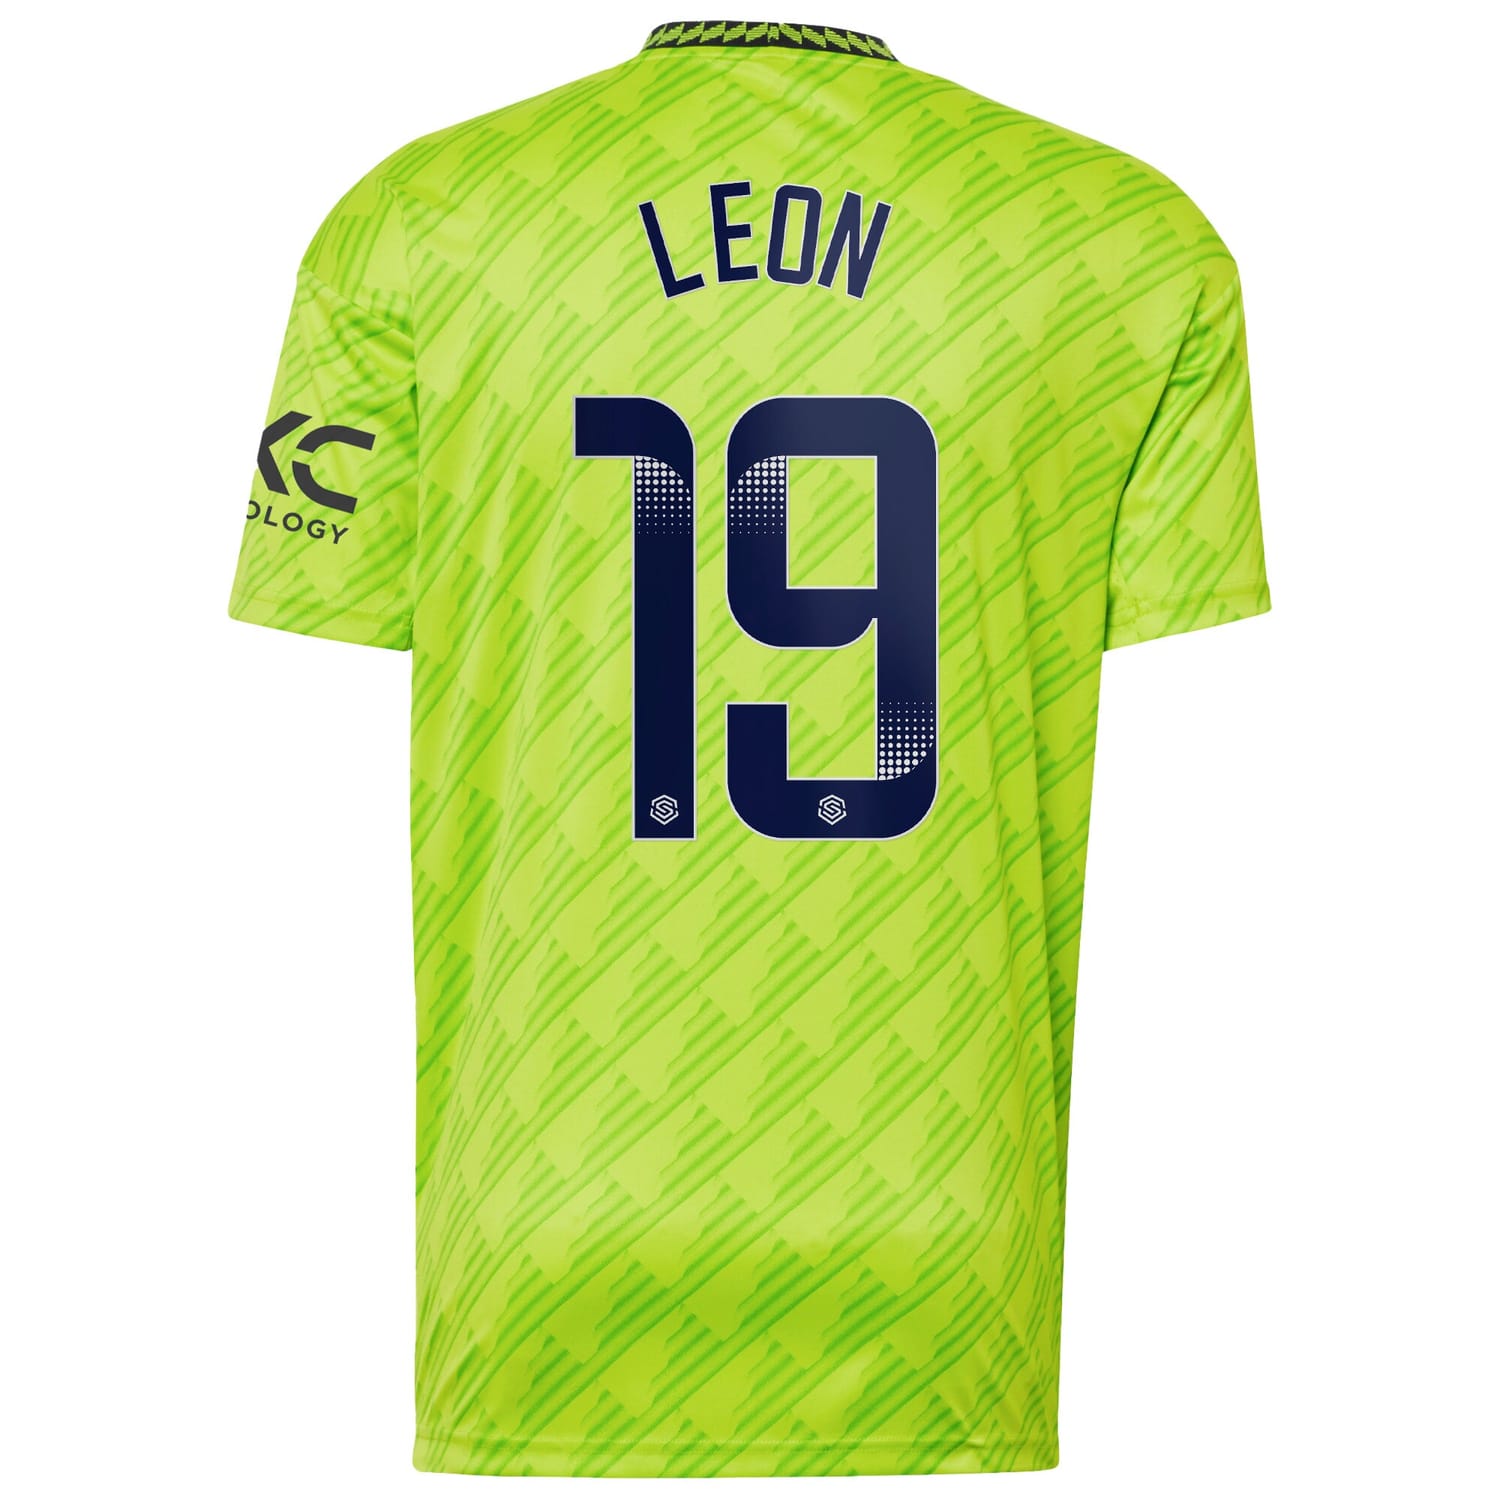 Premier League Manchester United Third Jersey Shirt 2022-23 player Adriana Leon 19 printing for Men